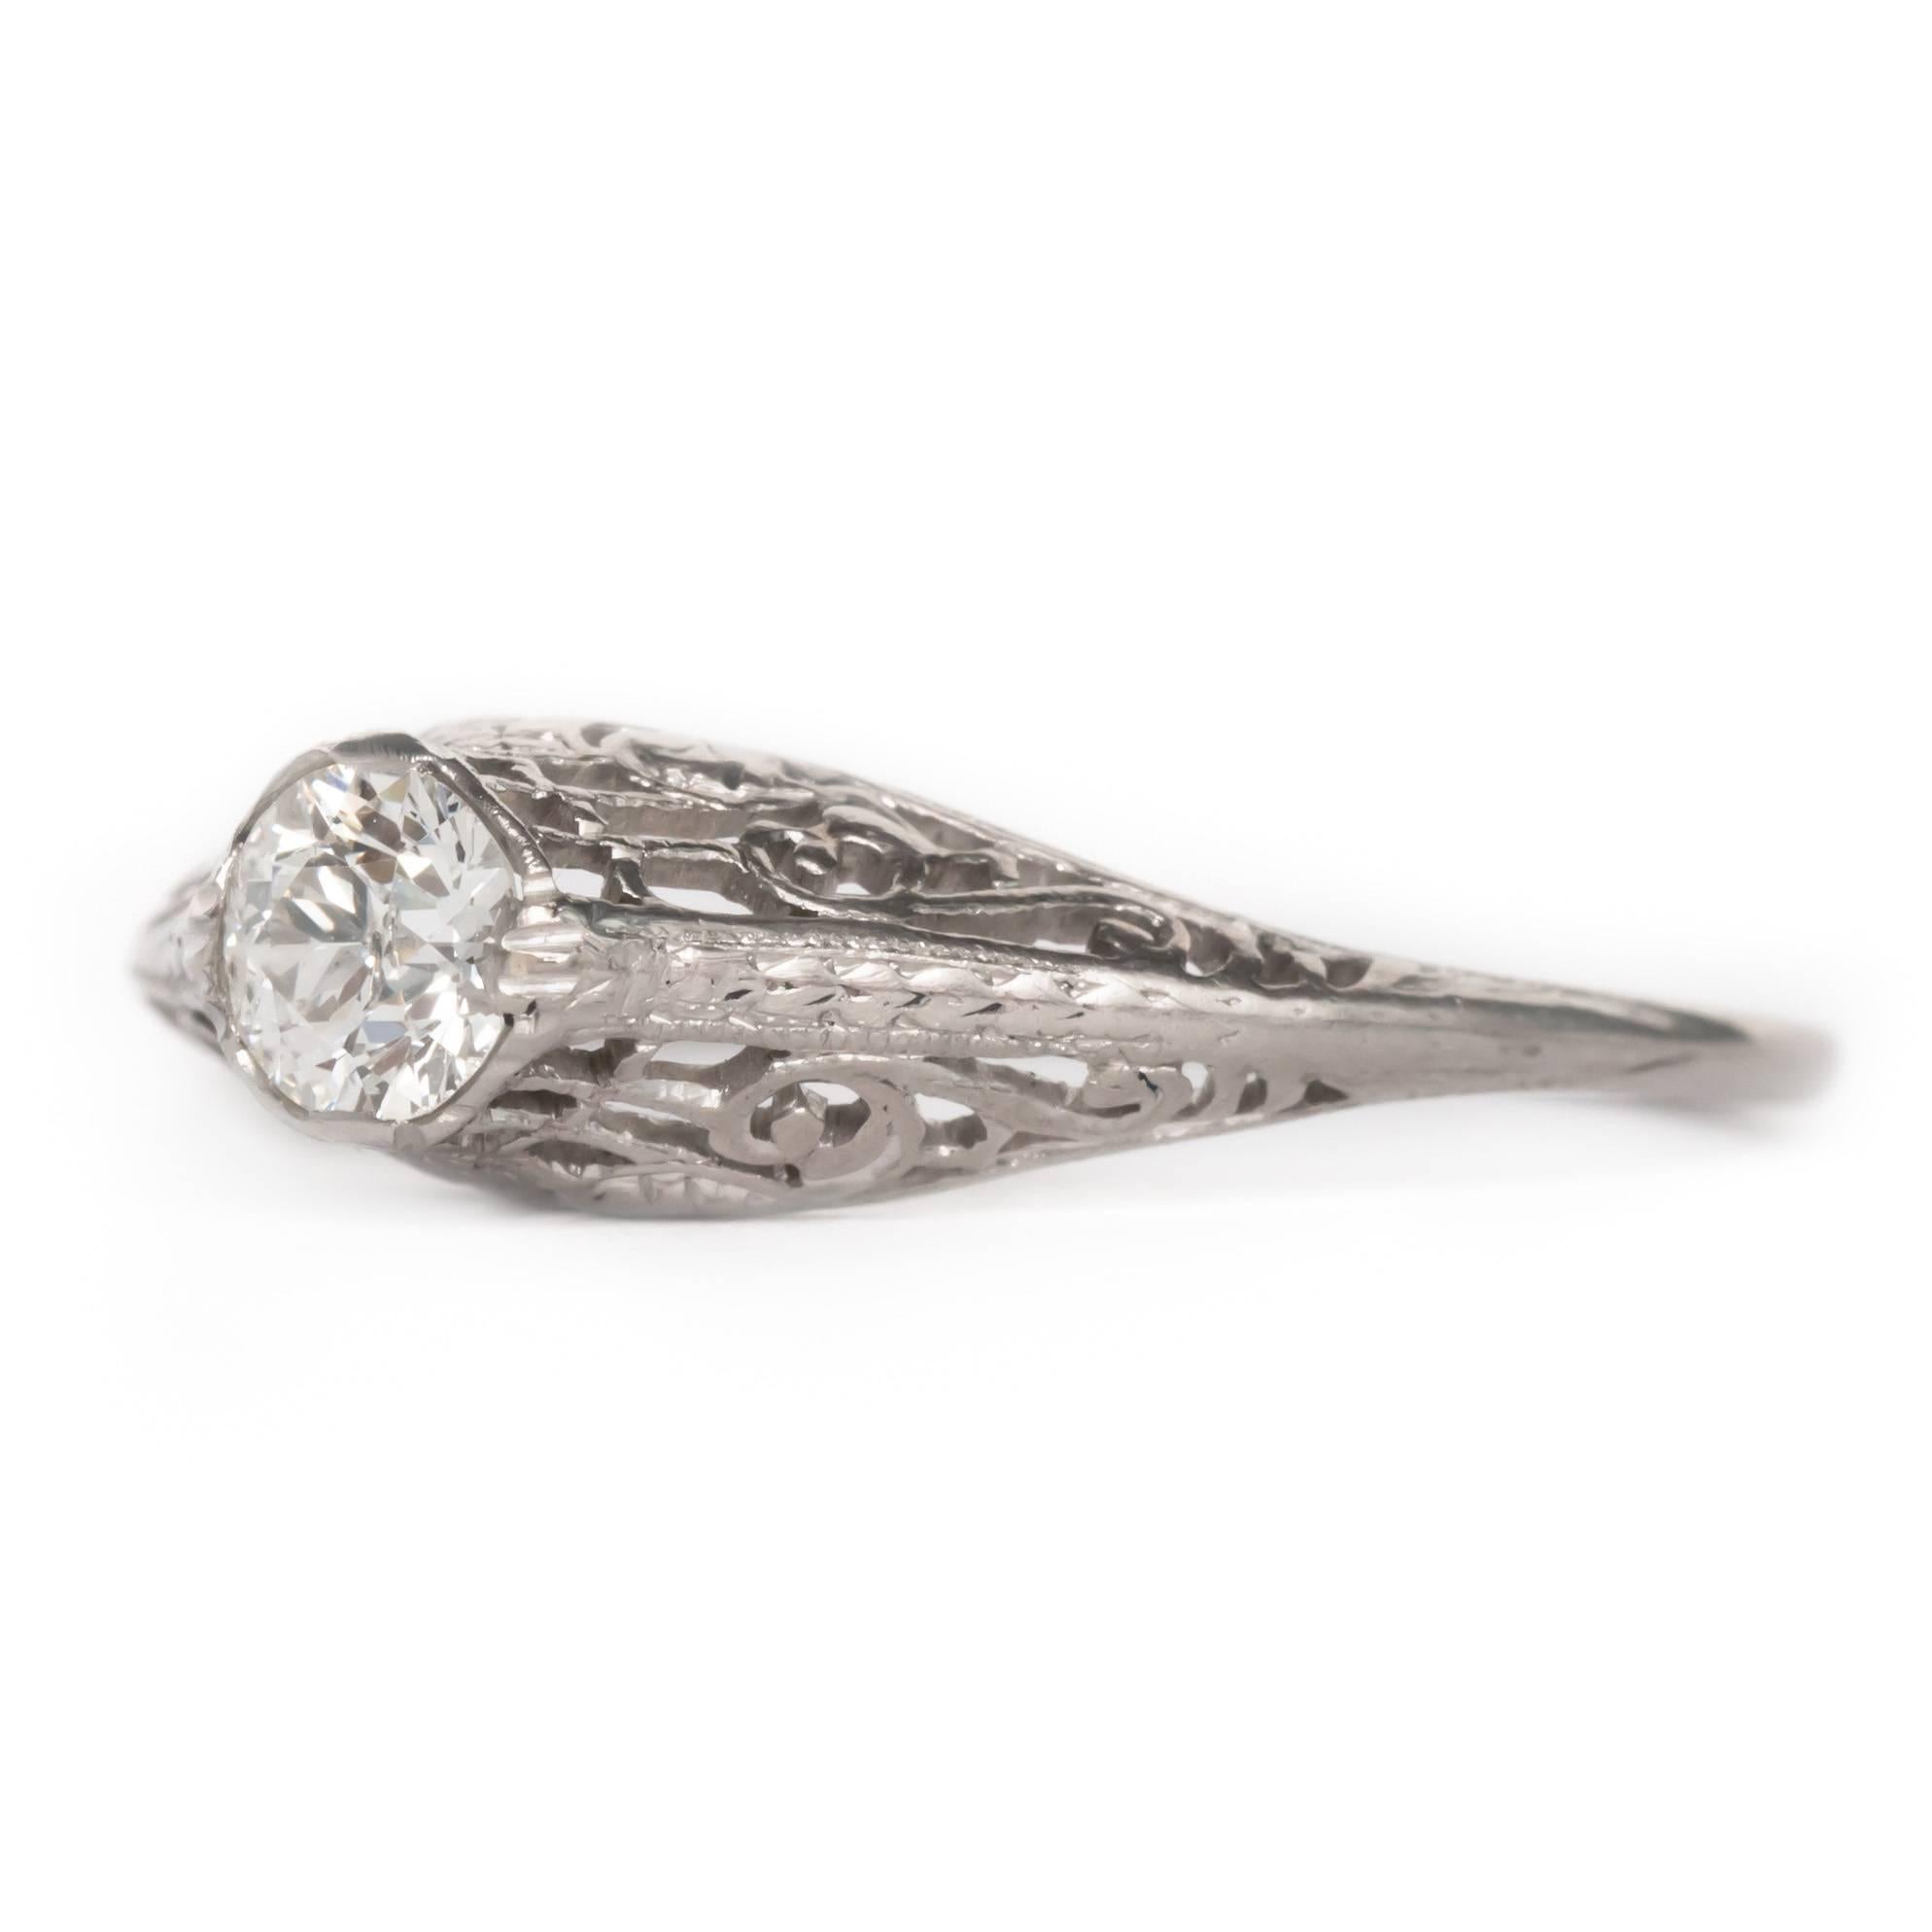 Item Details: 
Ring Size: Approximately 7.70
Metal Type: Platinum
Weight: 2.4 grams

Center Diamond Details:
Shape: Old European Brilliant
Carat Weight: .33 carat
Color: I
Clarity: VS2


Finger to Top of Stone Measurement: 6.40mm
